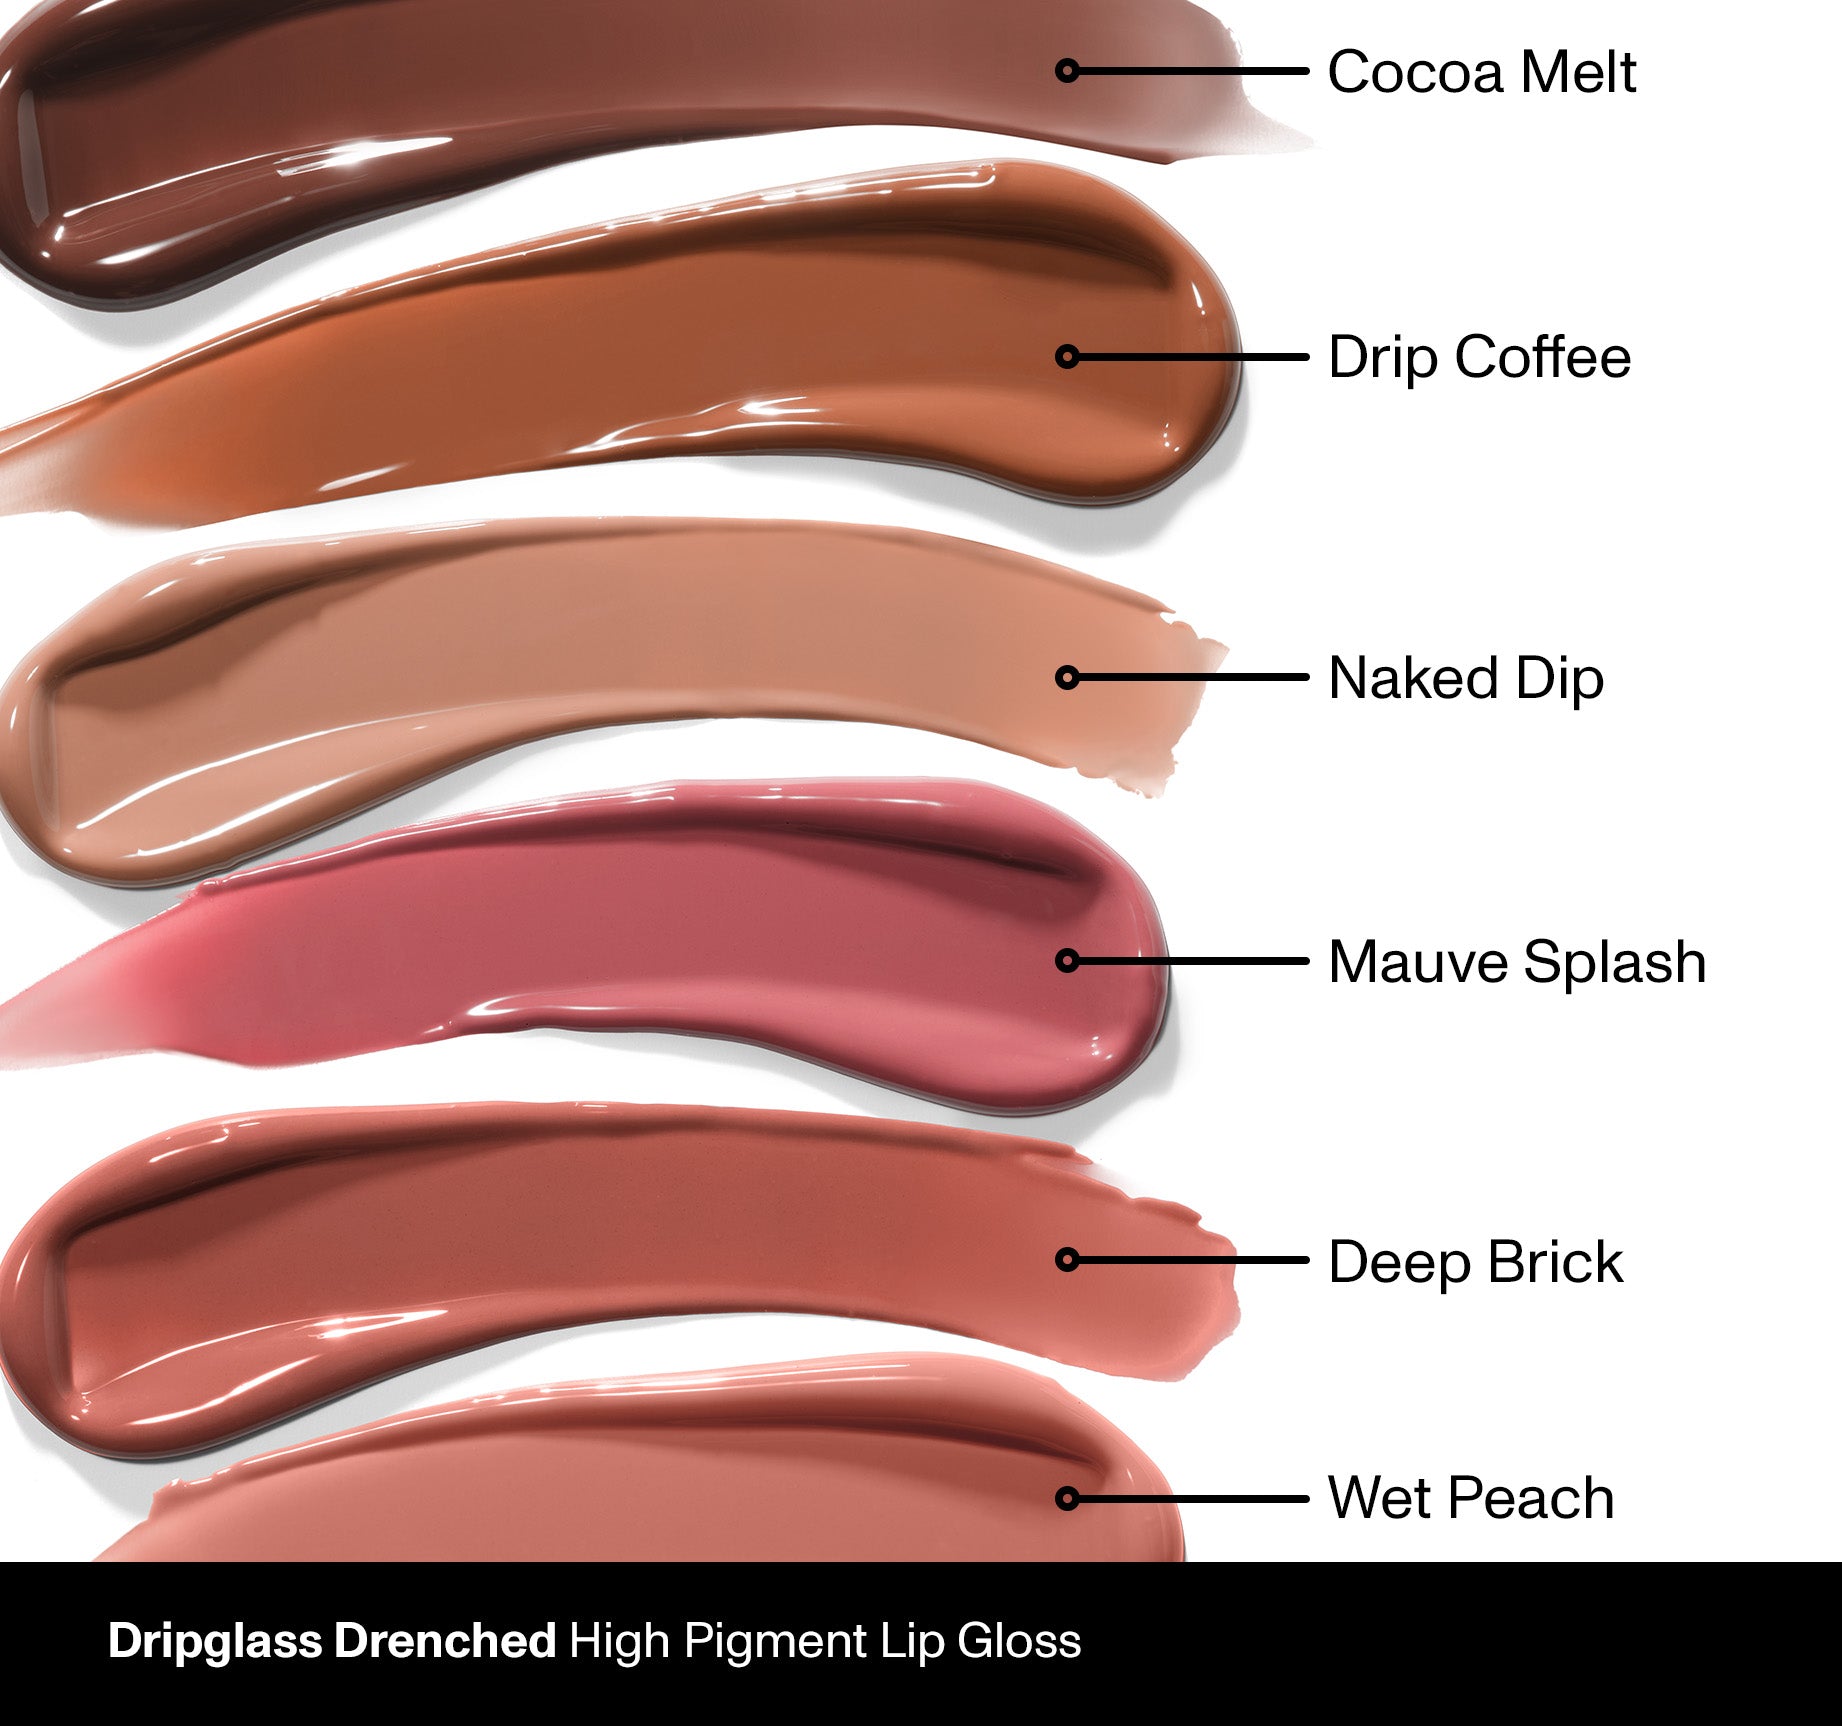 Dripglass Drenched High Pigment Lip Gloss - Deep Brick - Image 6